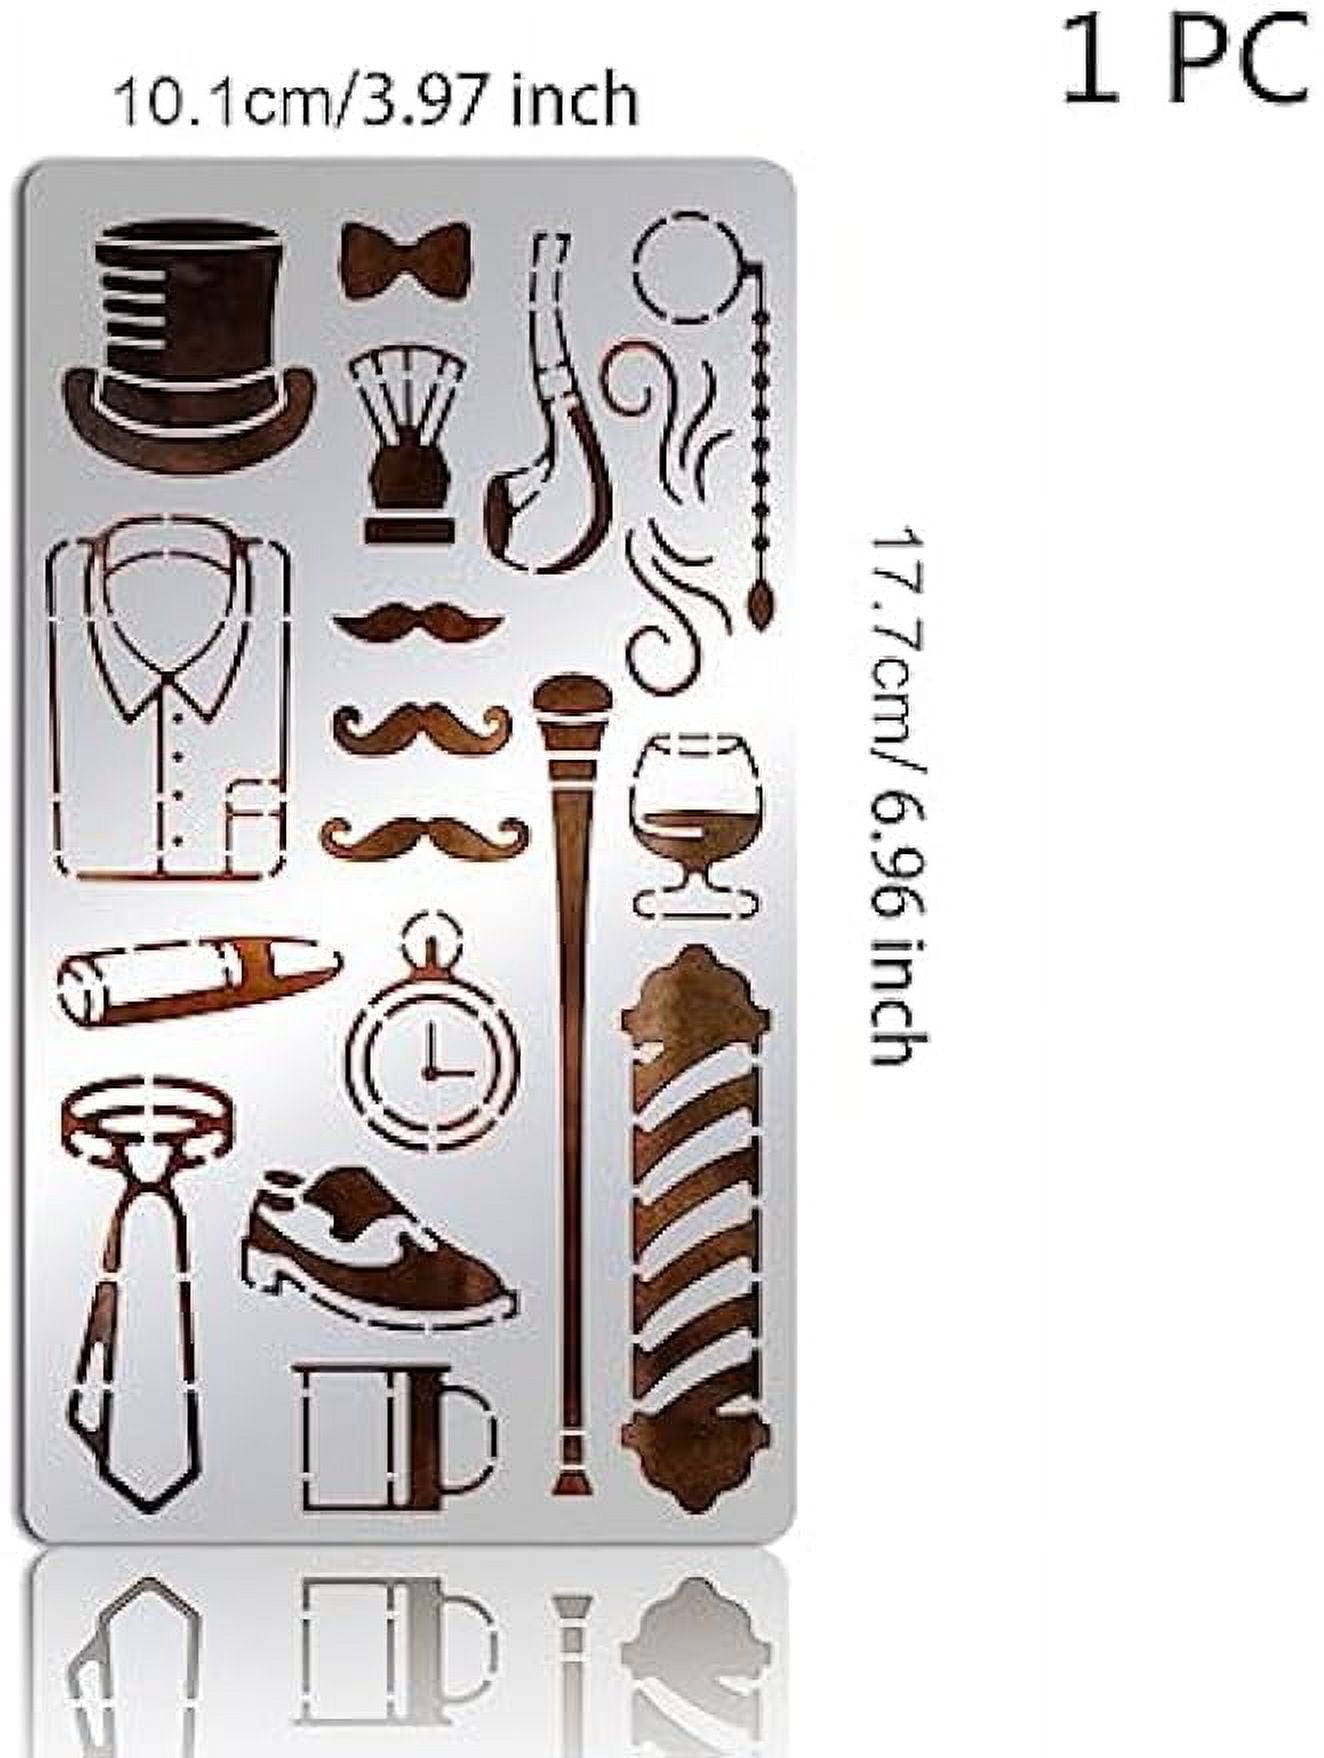 1PC Roman Element Theme Metal Stencil Template Journal Tool for Painting  Wood Burning 5.5x7.5inch